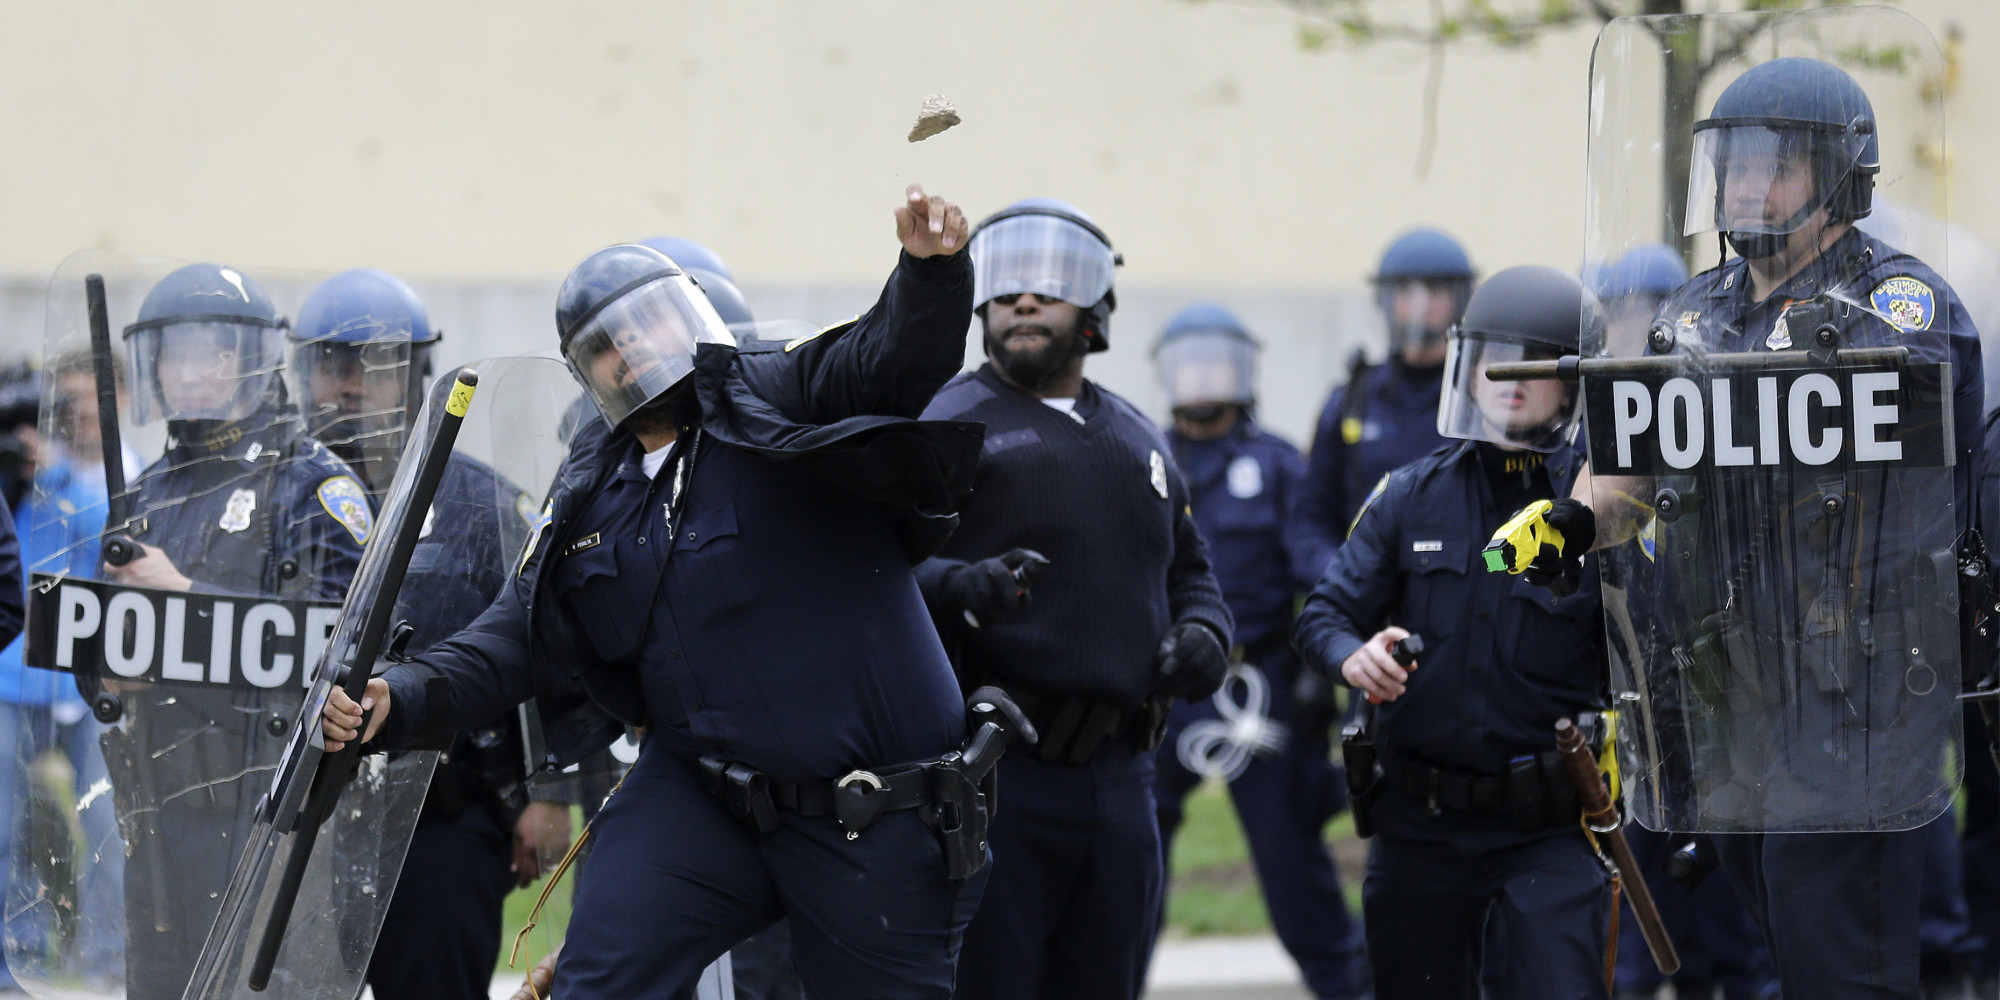 Police Throw Rocks Back At Protesters In Baltimore HuffPost